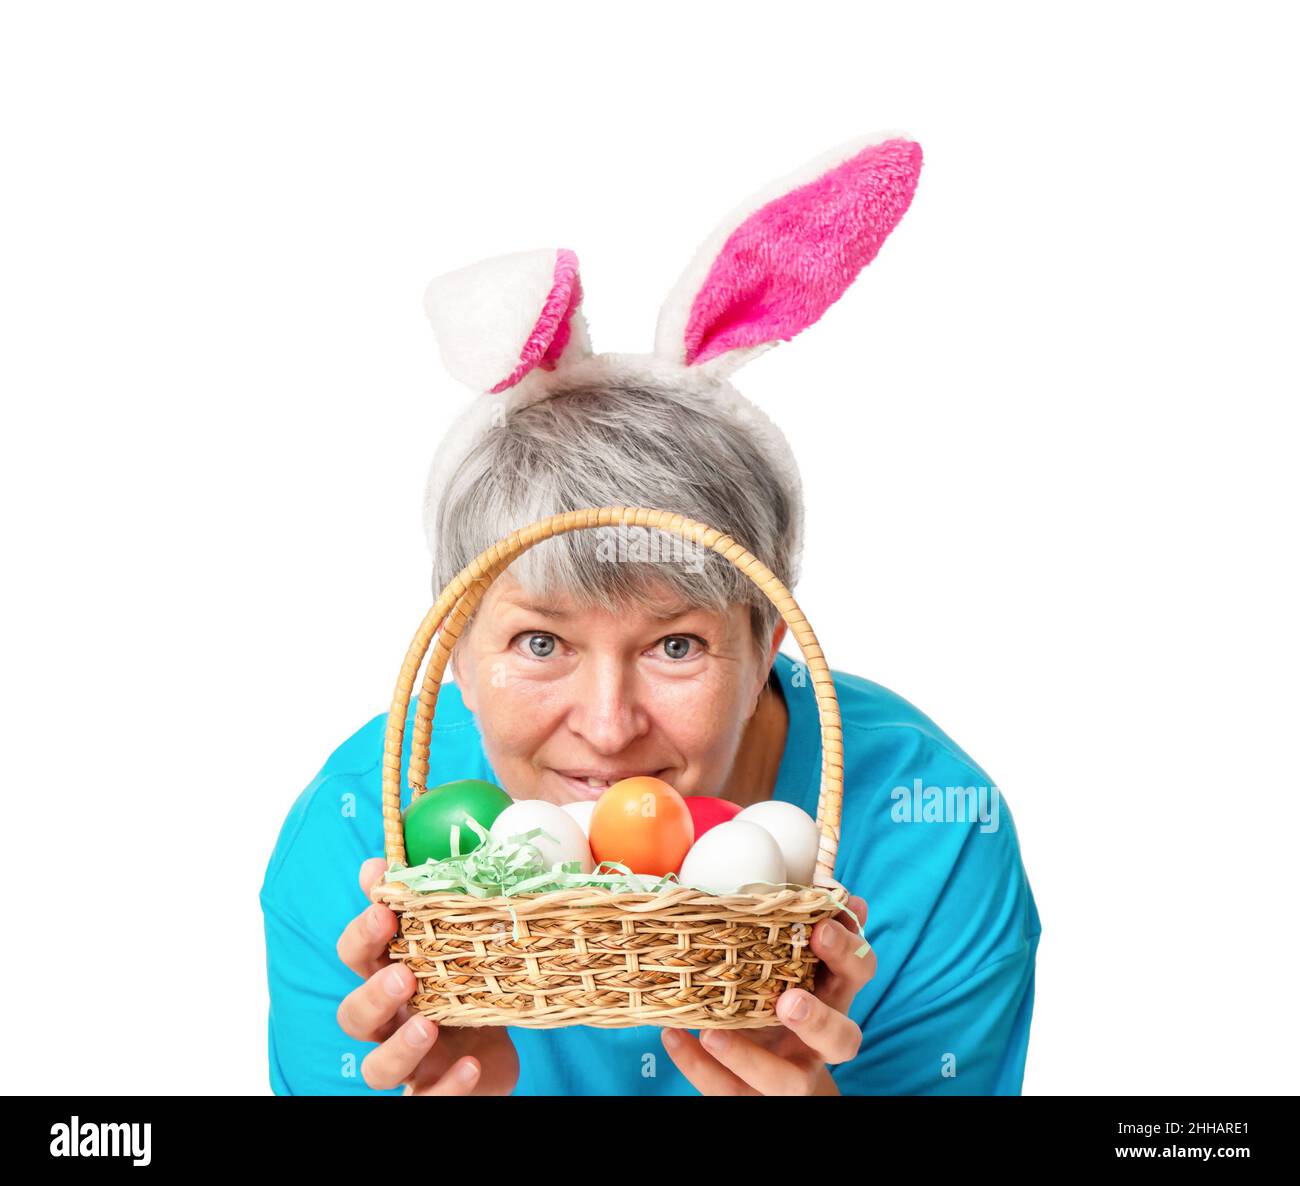 Senior woman peeking out from behind a basket with Easter eggs Isolated on white background Stock Photo